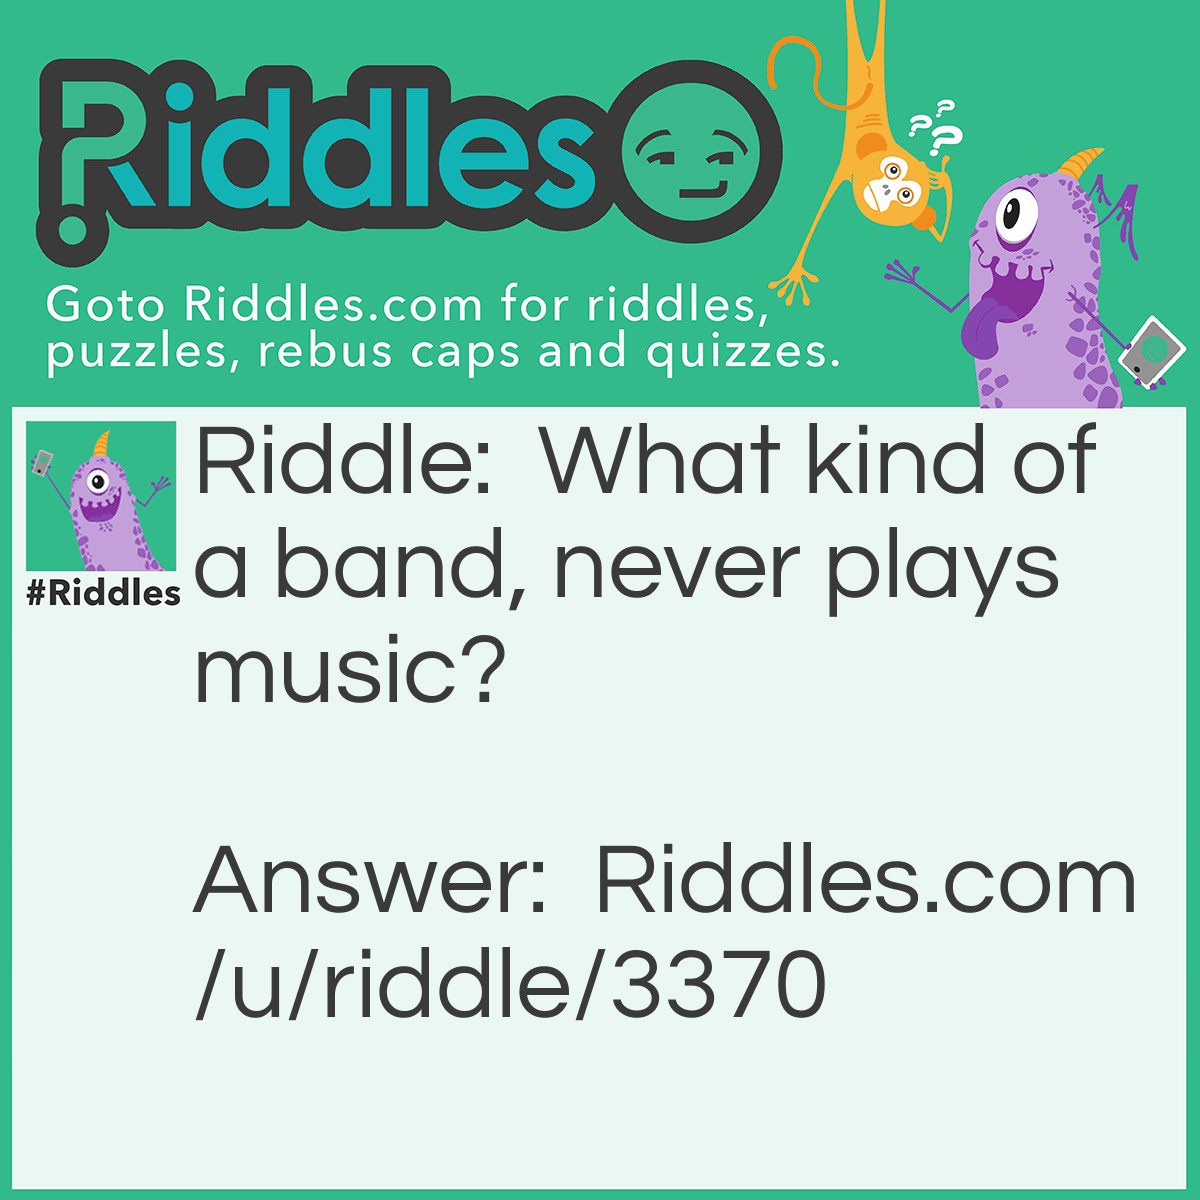 Riddle: What kind of a band, never plays music? Answer: A rubber band!